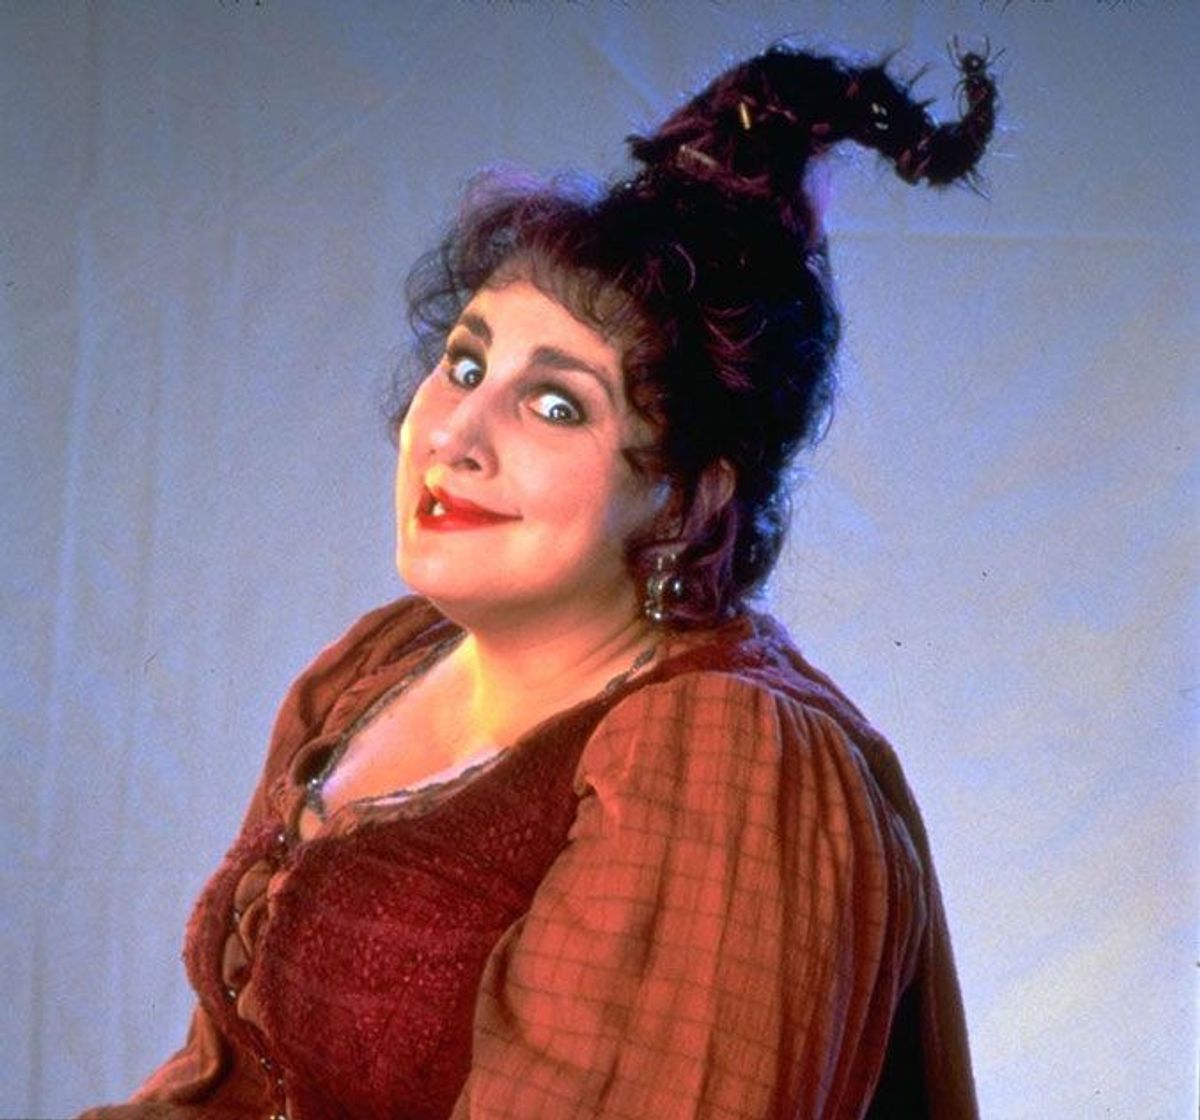 5 Reasons I Am Literally Mary Sanderson From "Hocus Pocus"